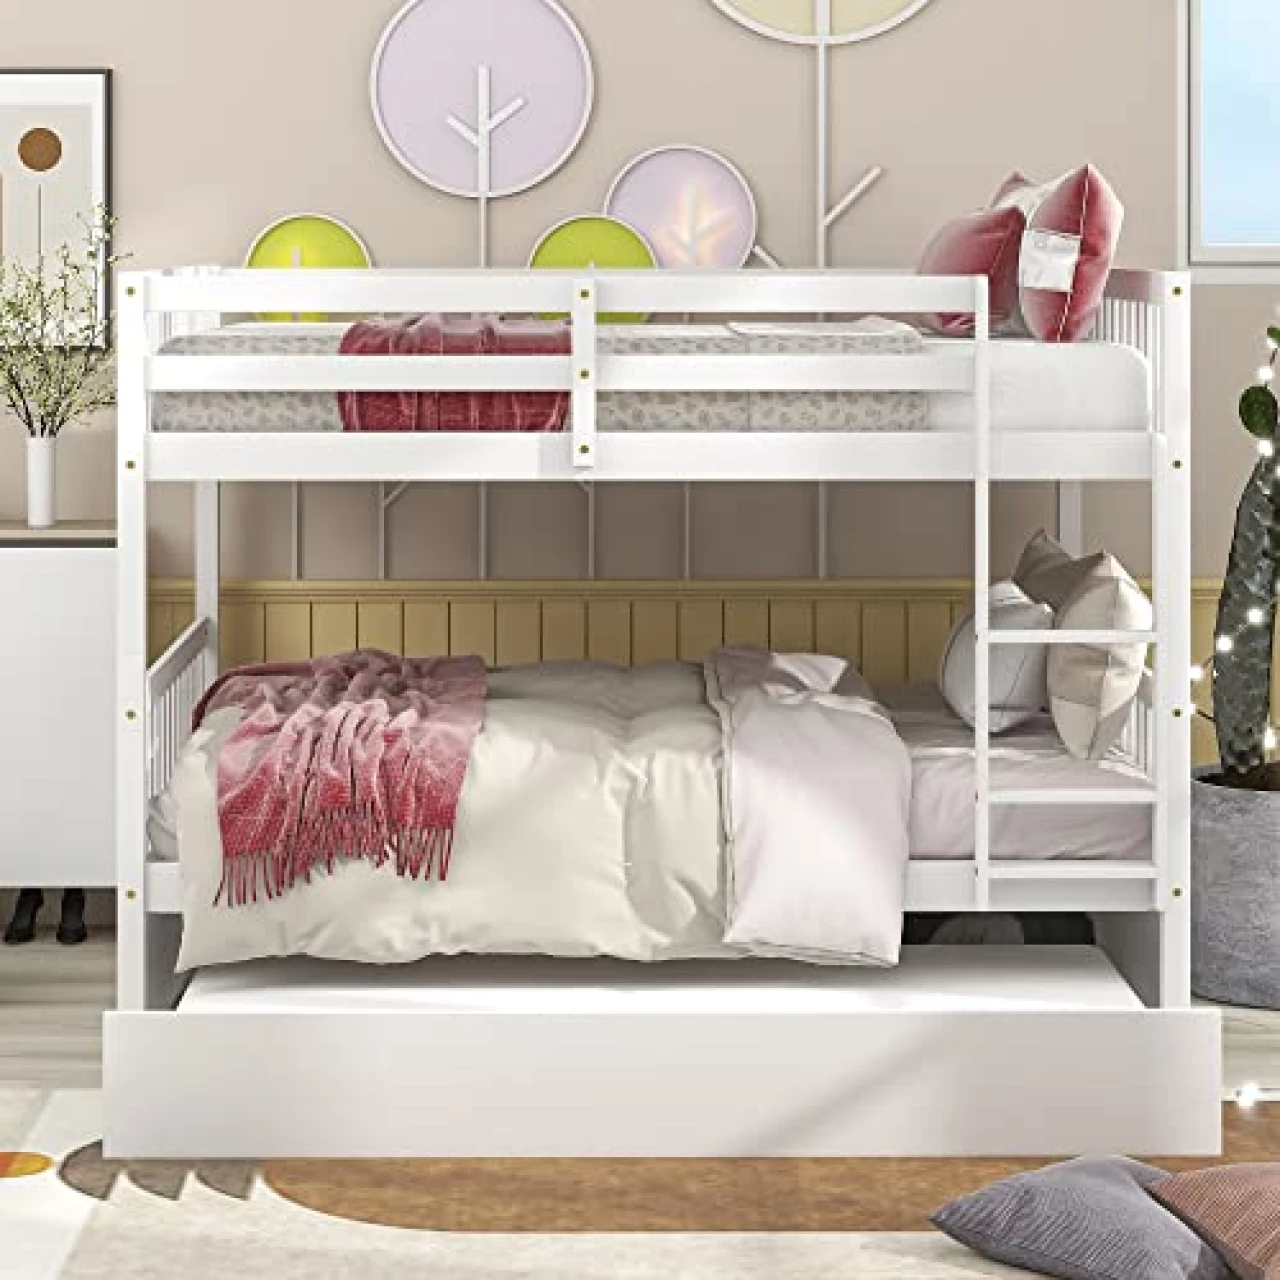 BIADNBZ Full Over Full Bunk Bed with Trundle, Solid Wood 3 Bedframe with Ladder and Safety Rails, can be Detachable, for Kids Teens Adults, Bedroom/Dorm Furniture, White